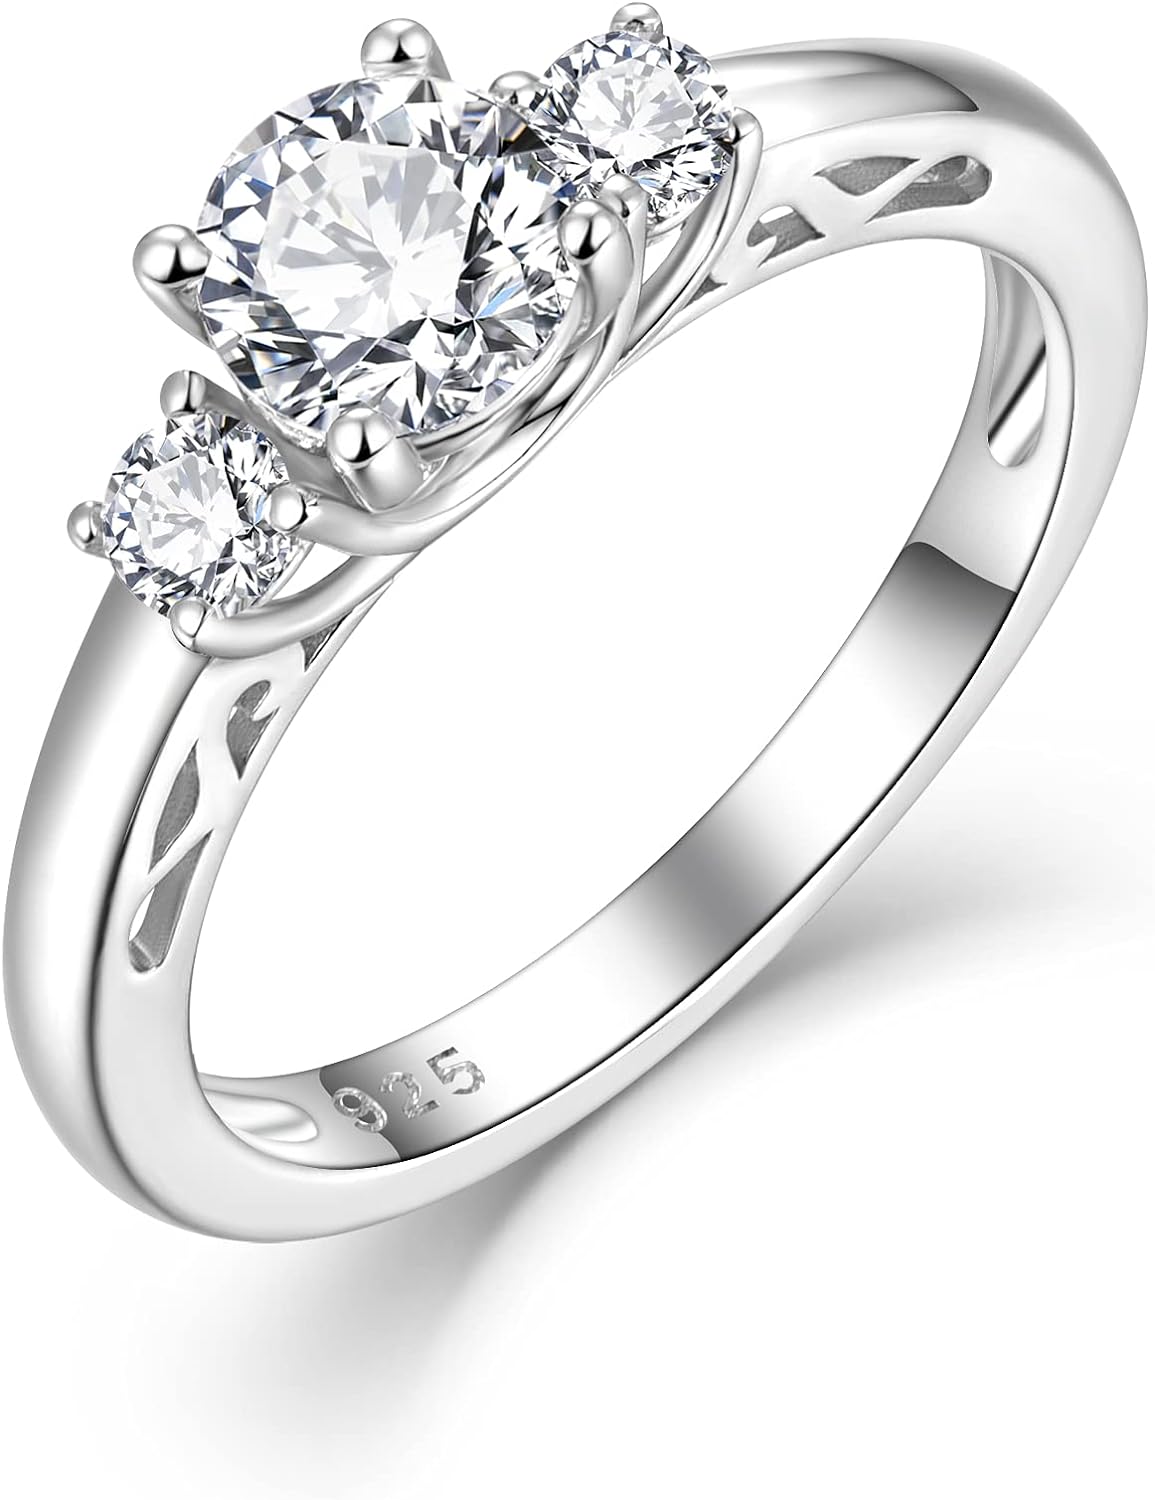 925 STERLING SILVER WOMEN'S CZ ENGAGEMENT/ PROMISE RING SIZE 5-10 